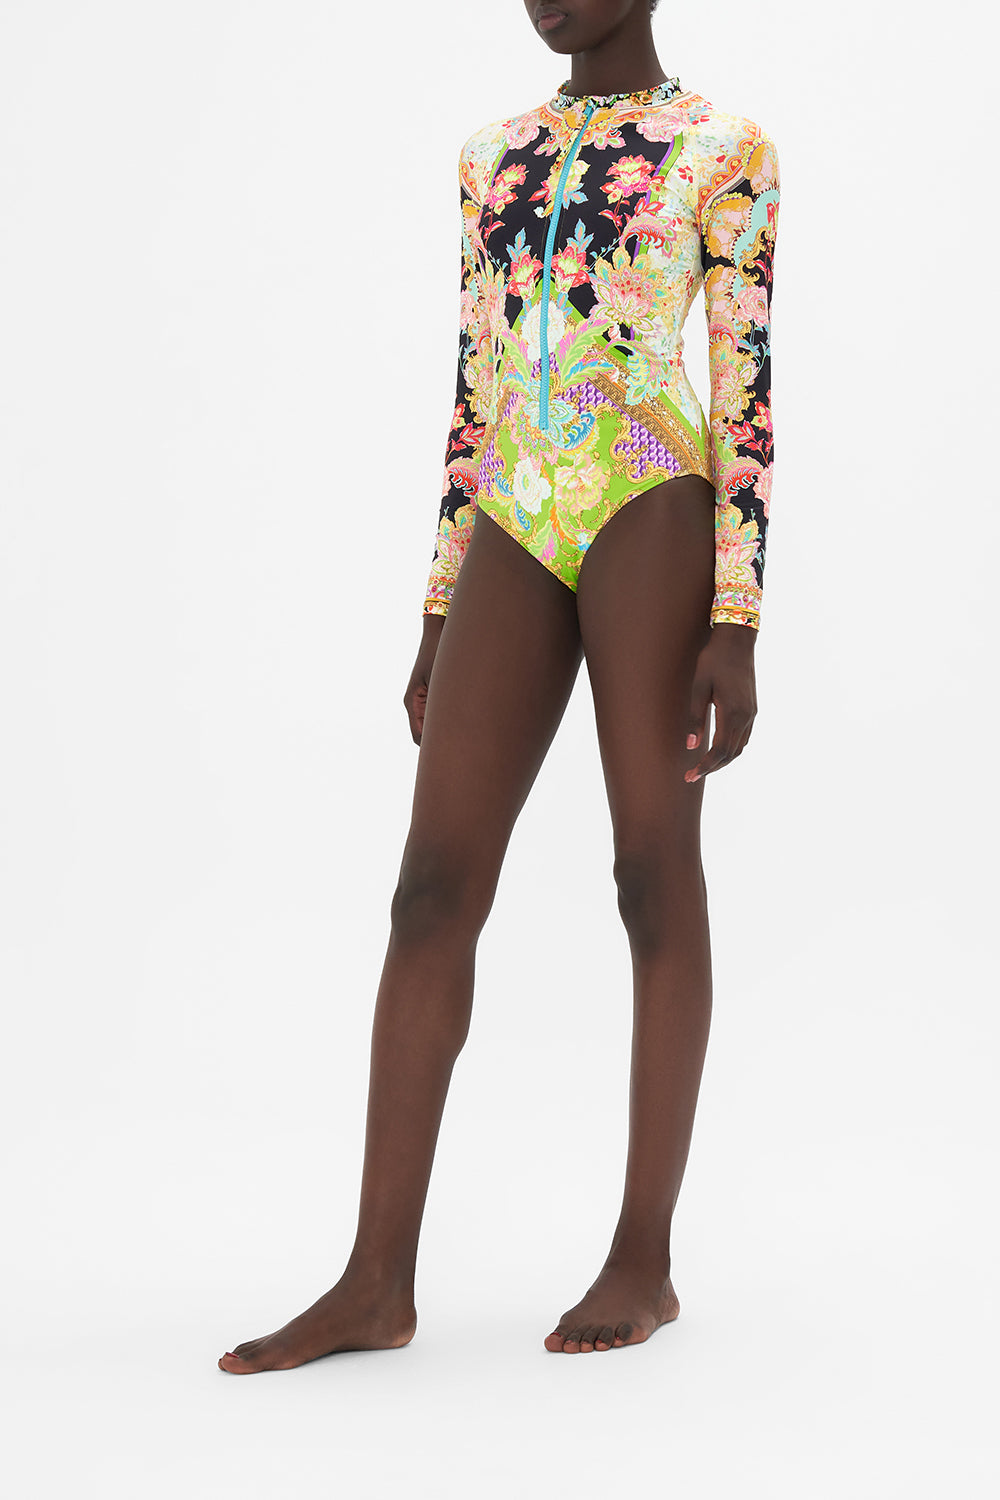 Product view of CAMILLA swimwear zip front paddle suit in Sundowners in Sicily print